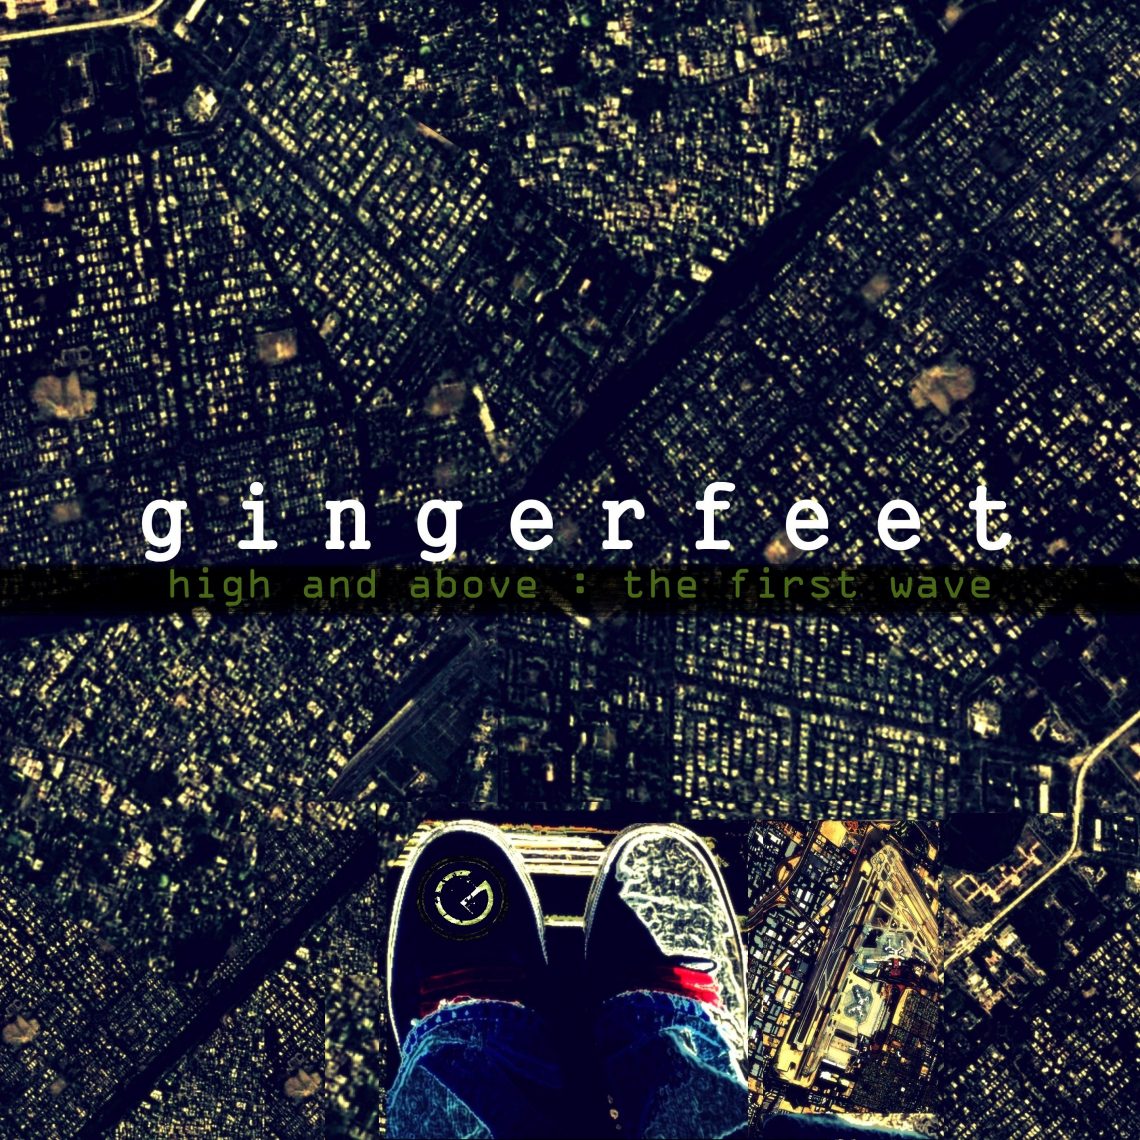 Gingerfeet – High and Above: The First Wave